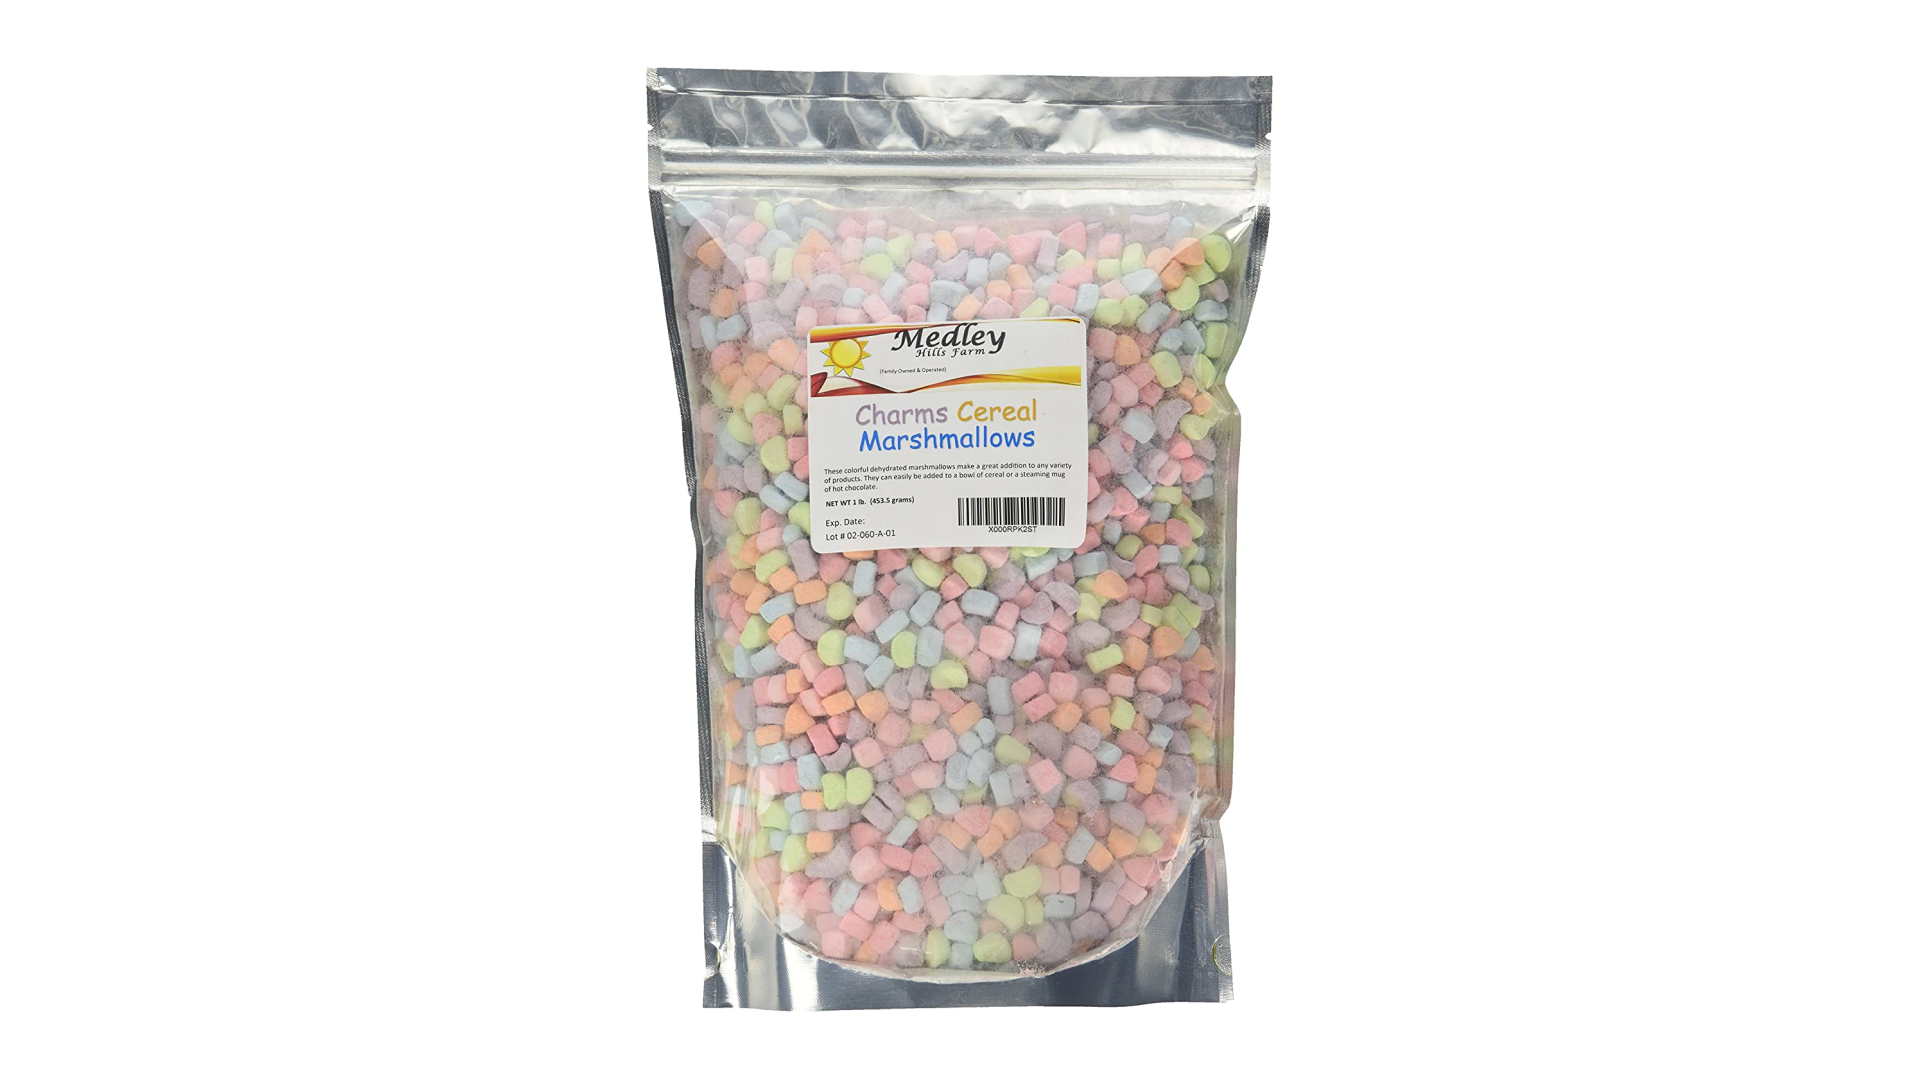 Cereal marshmallows